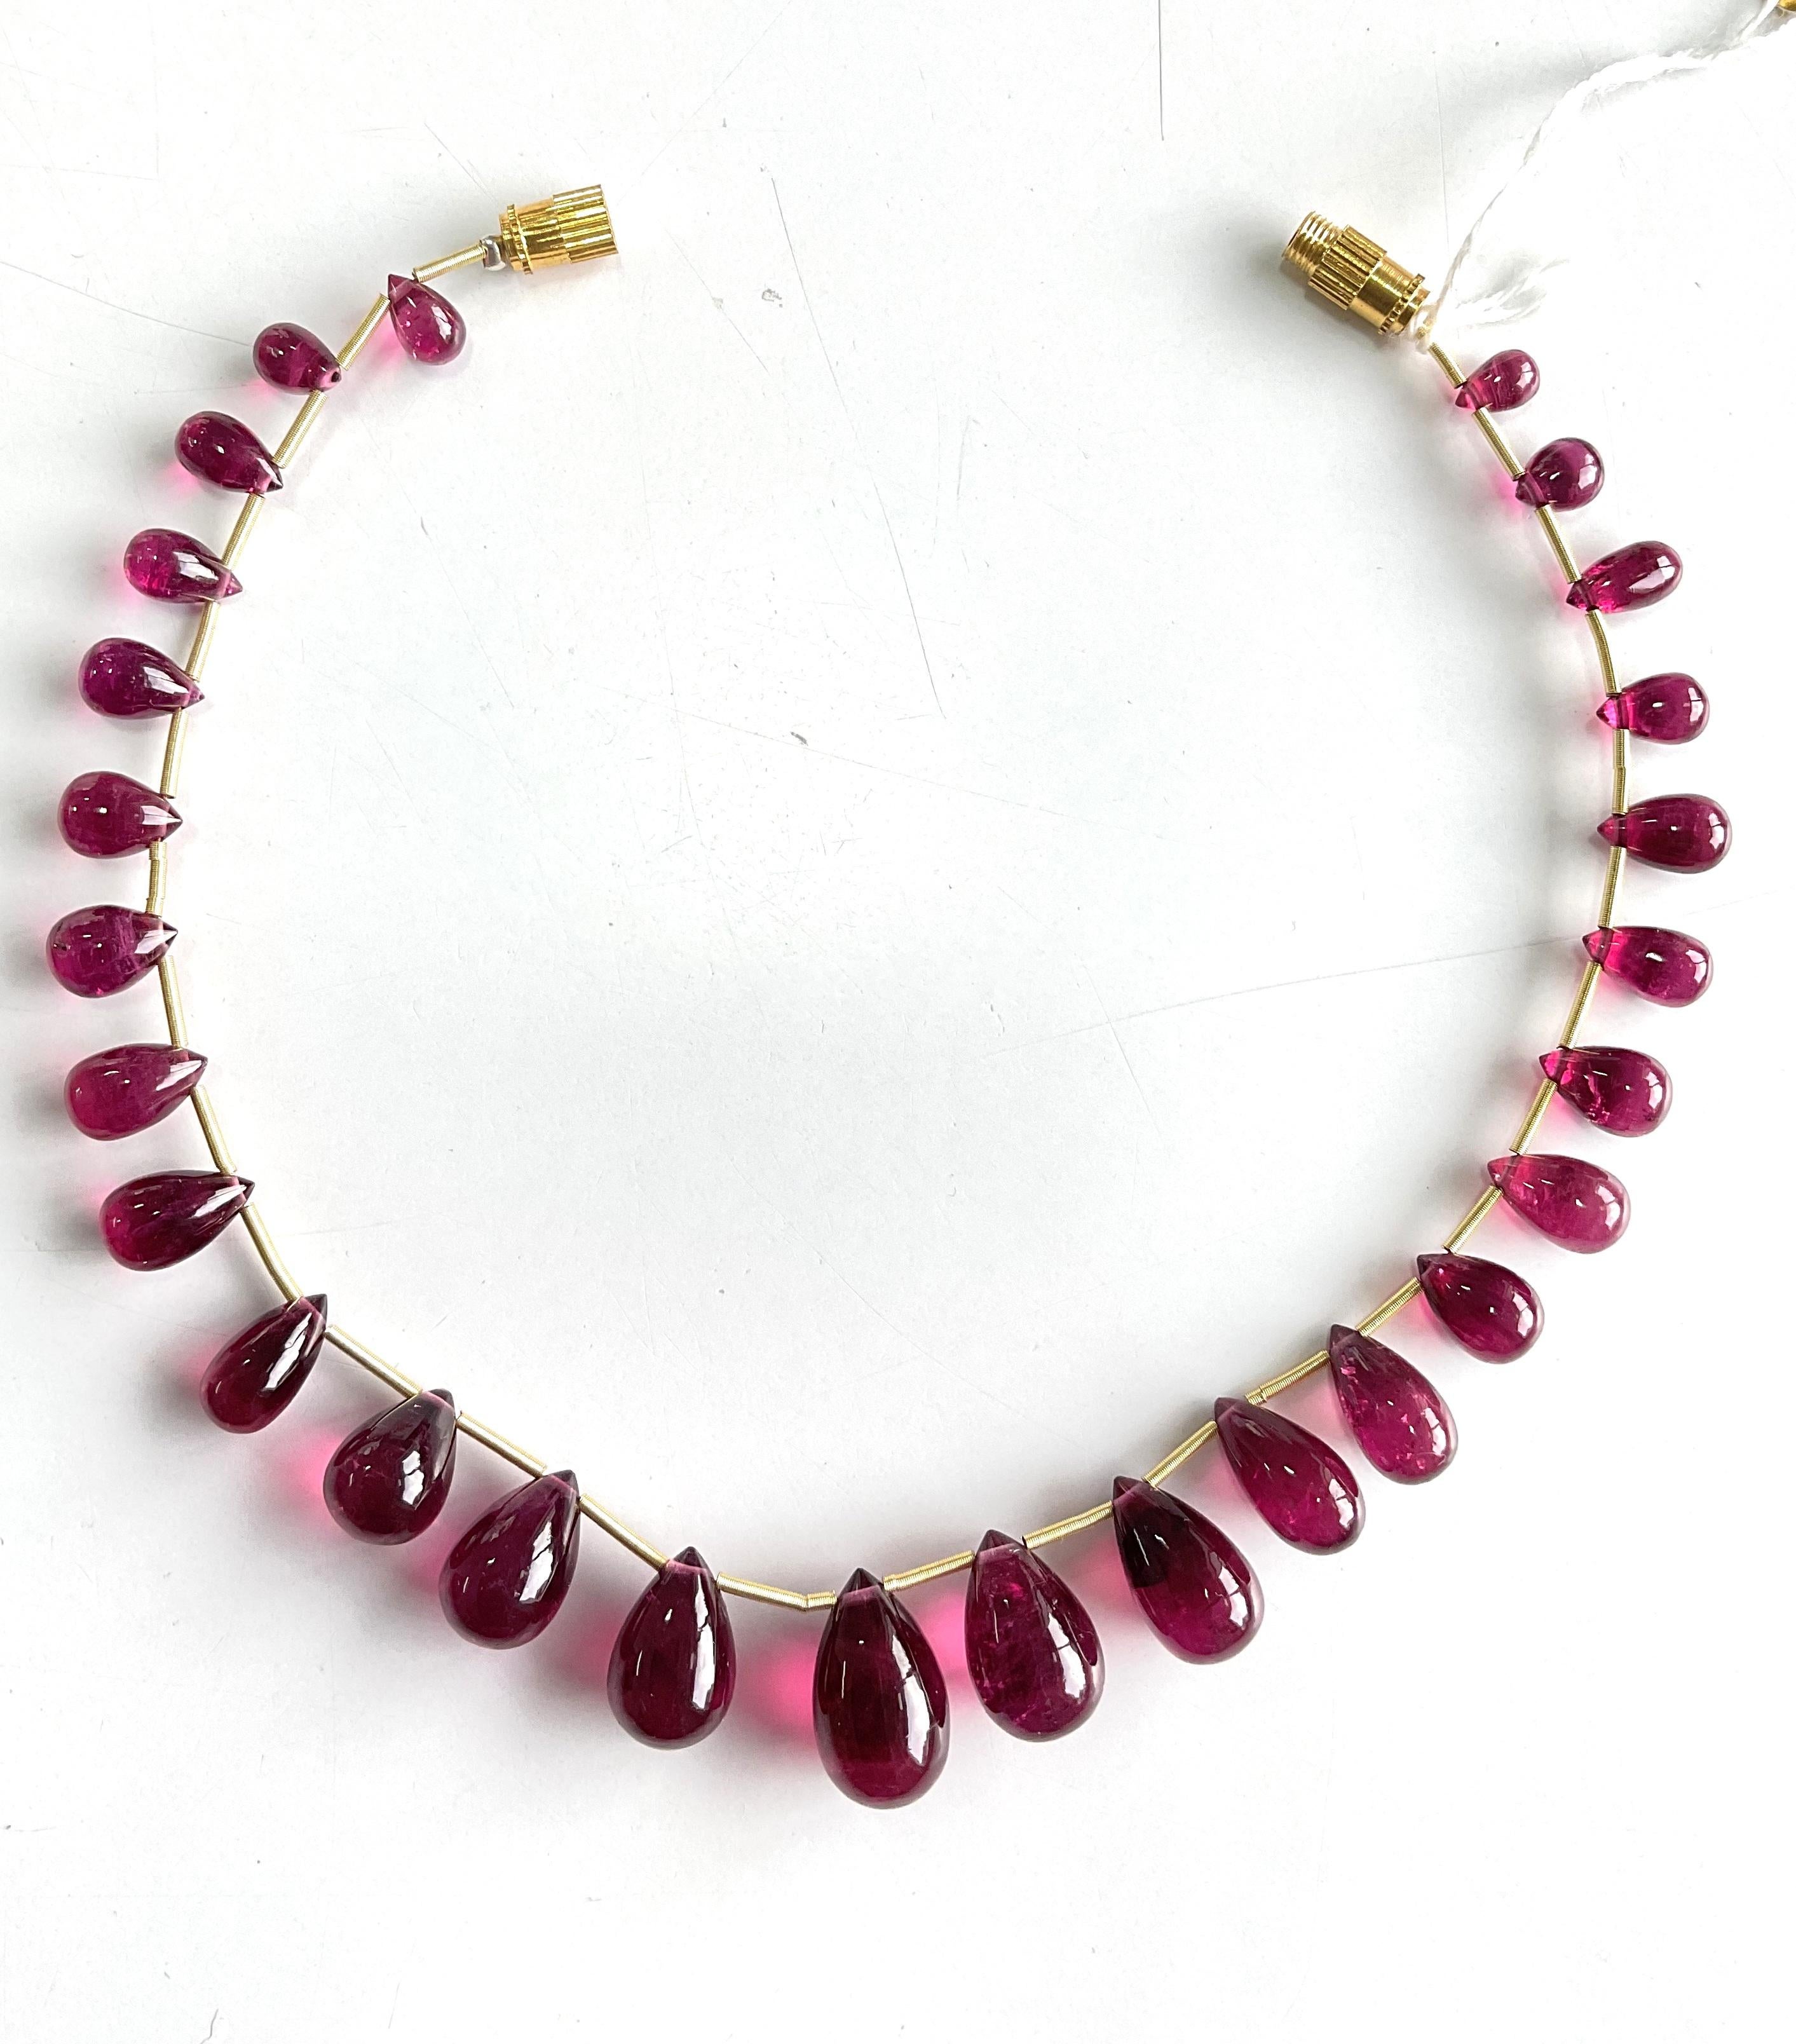 80.00 Carats Rubellite Layout Drops Top Quality For Fine Jewelry Natural Gem For Sale 1